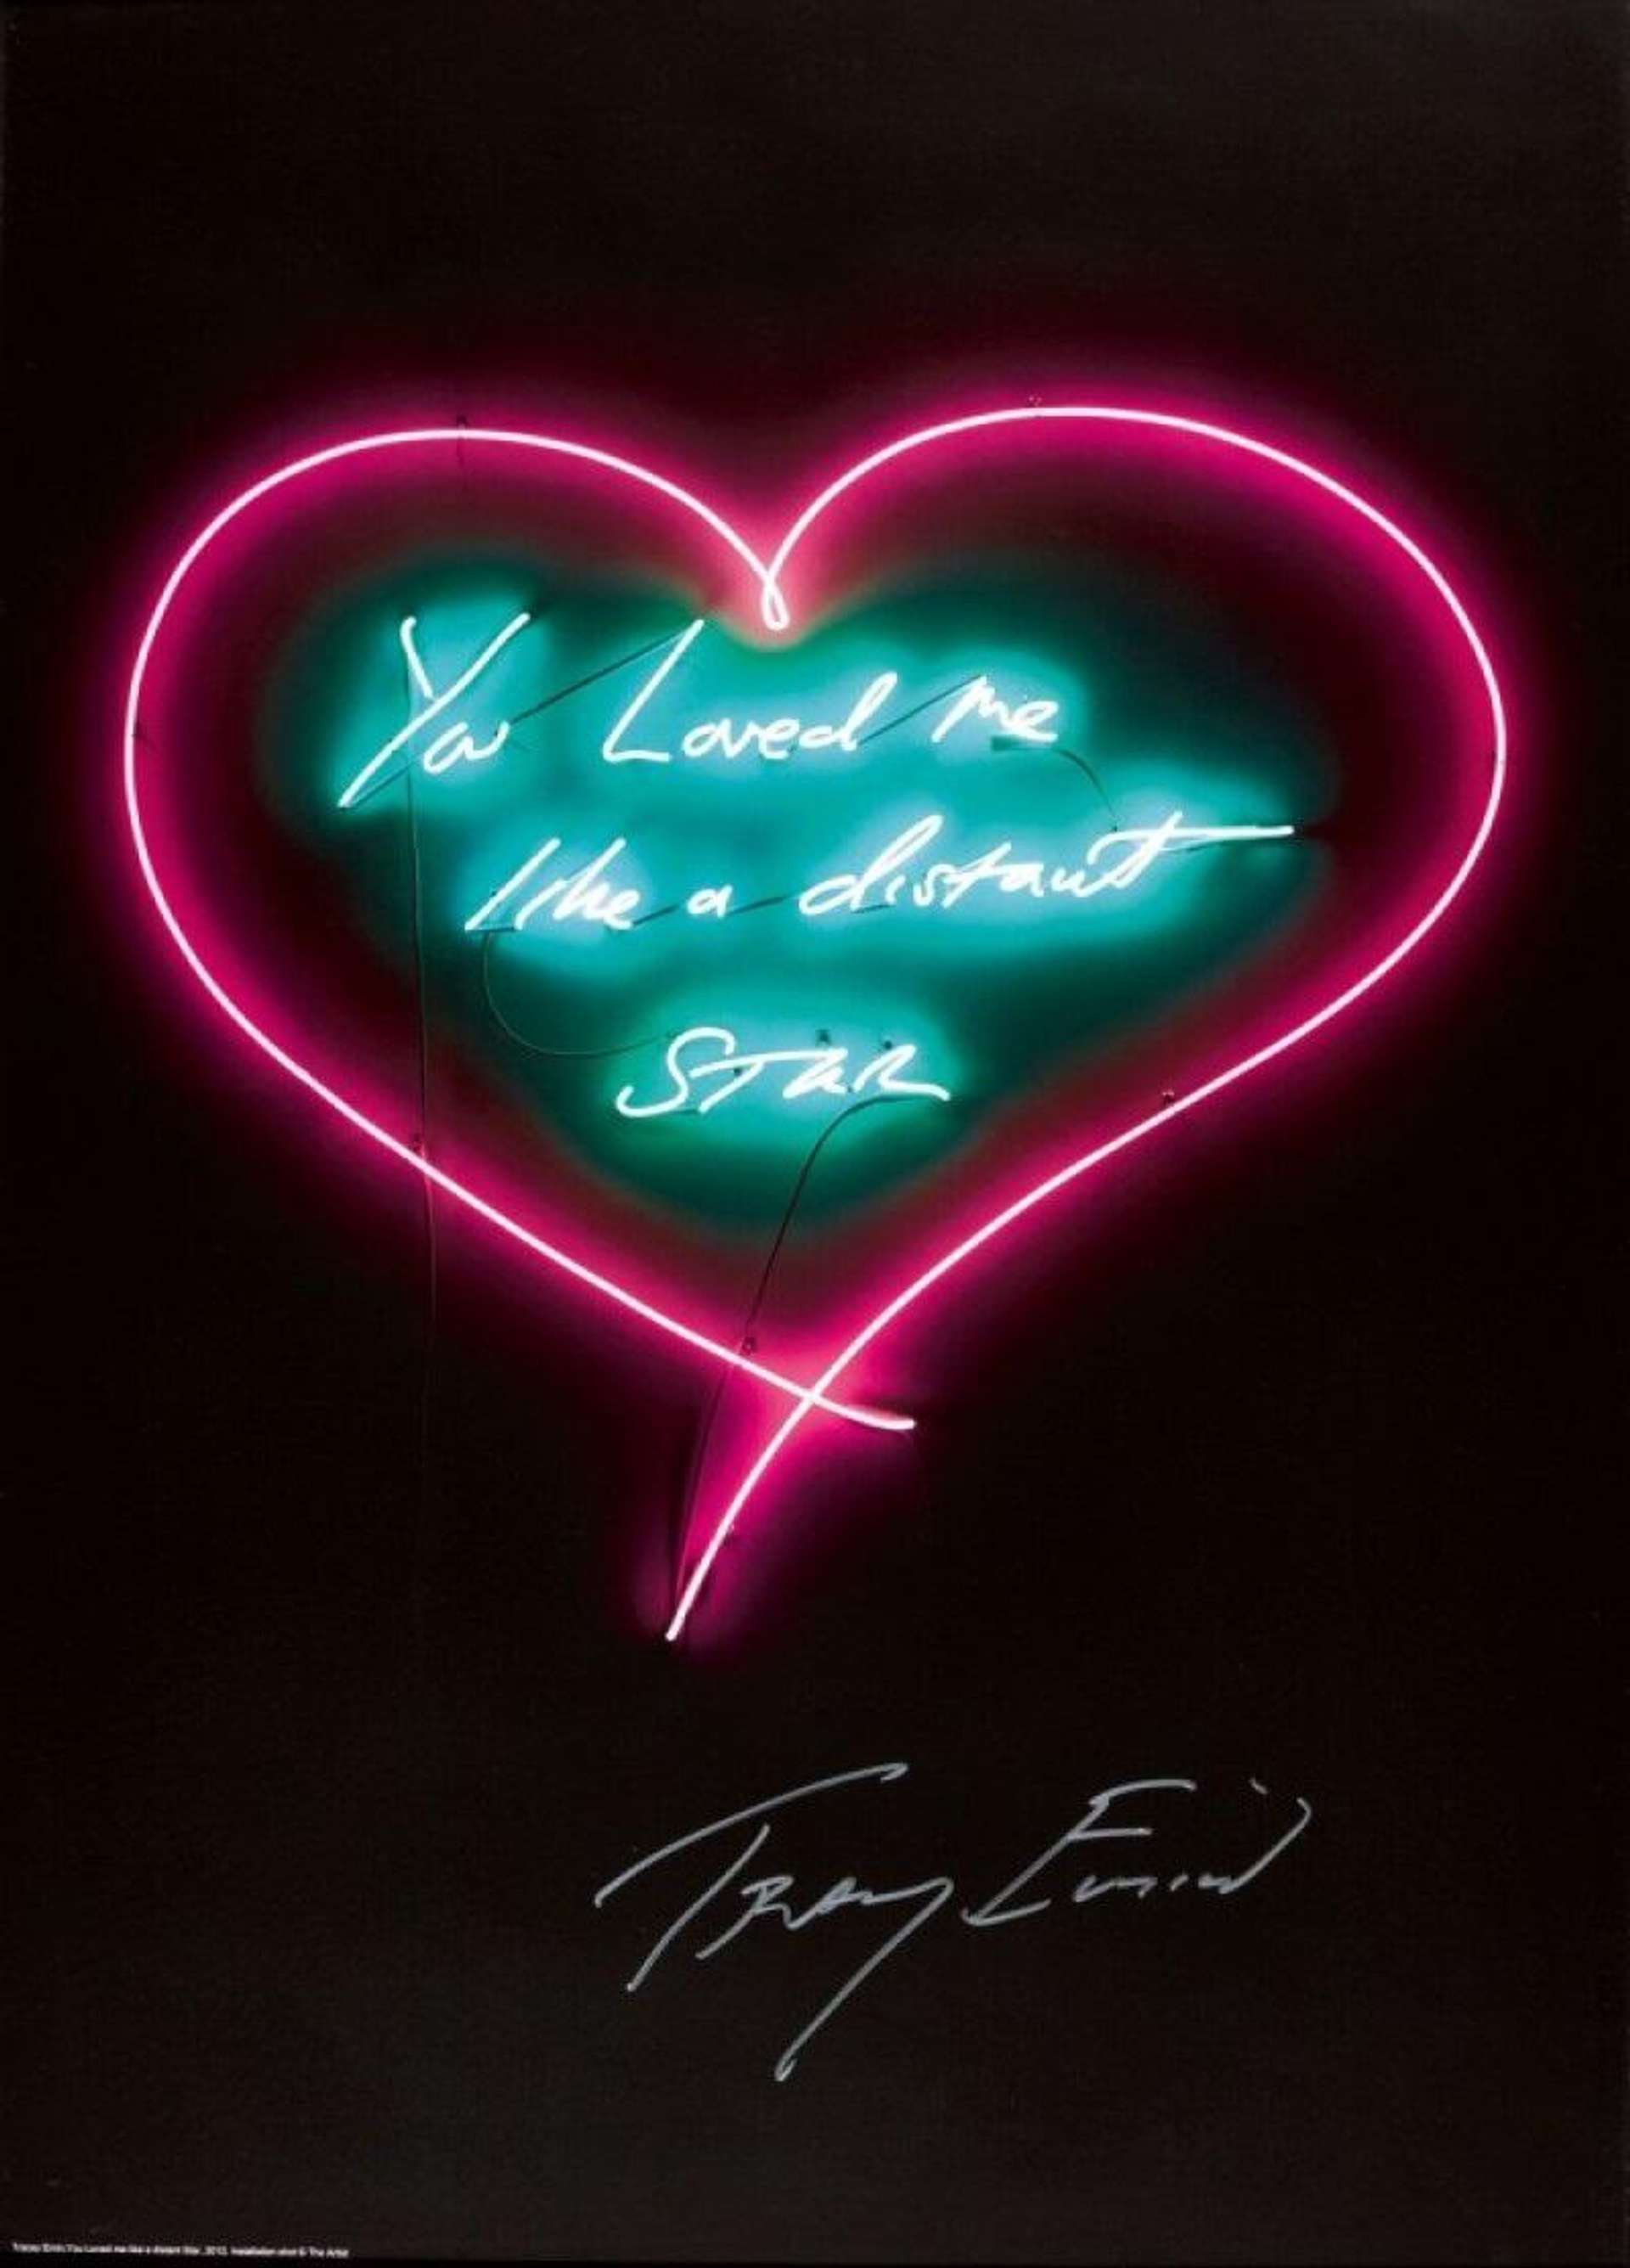 You Loved Me Like A Distant Star - Signed Print by Tracey Emin 2016 - MyArtBroker